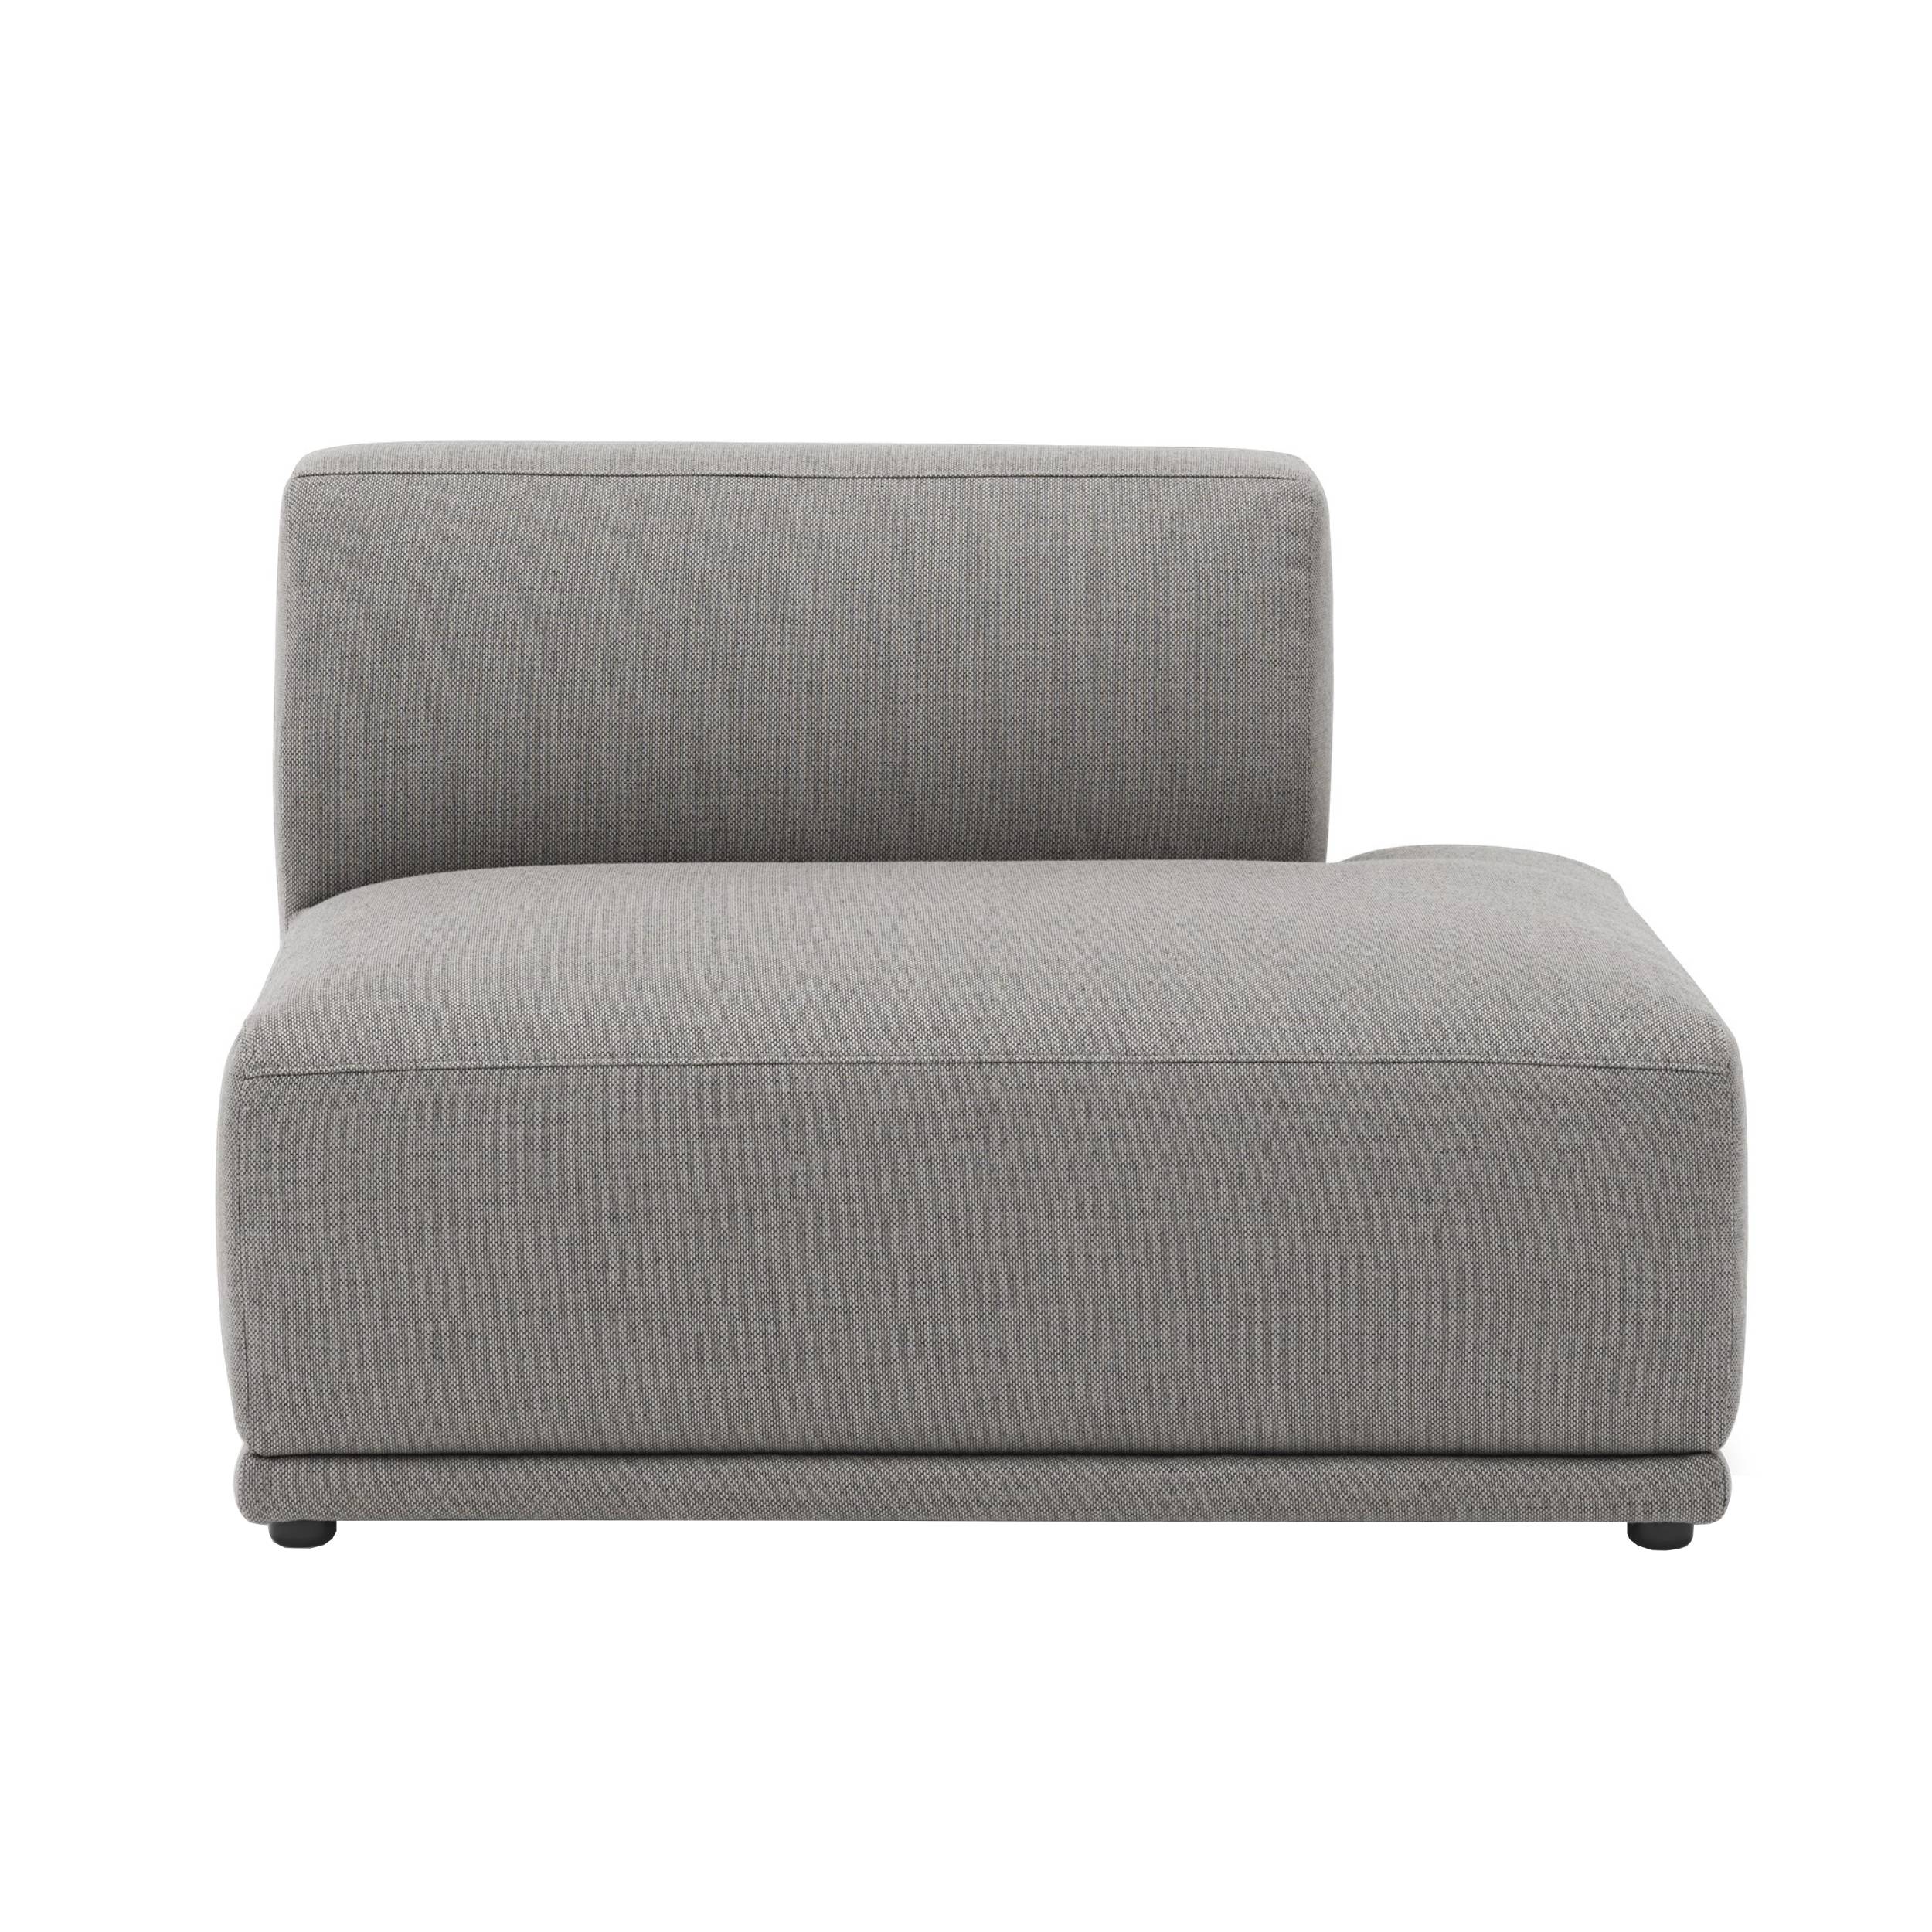 Connect Modular Sofa Pieces: G - Right Open-Ended